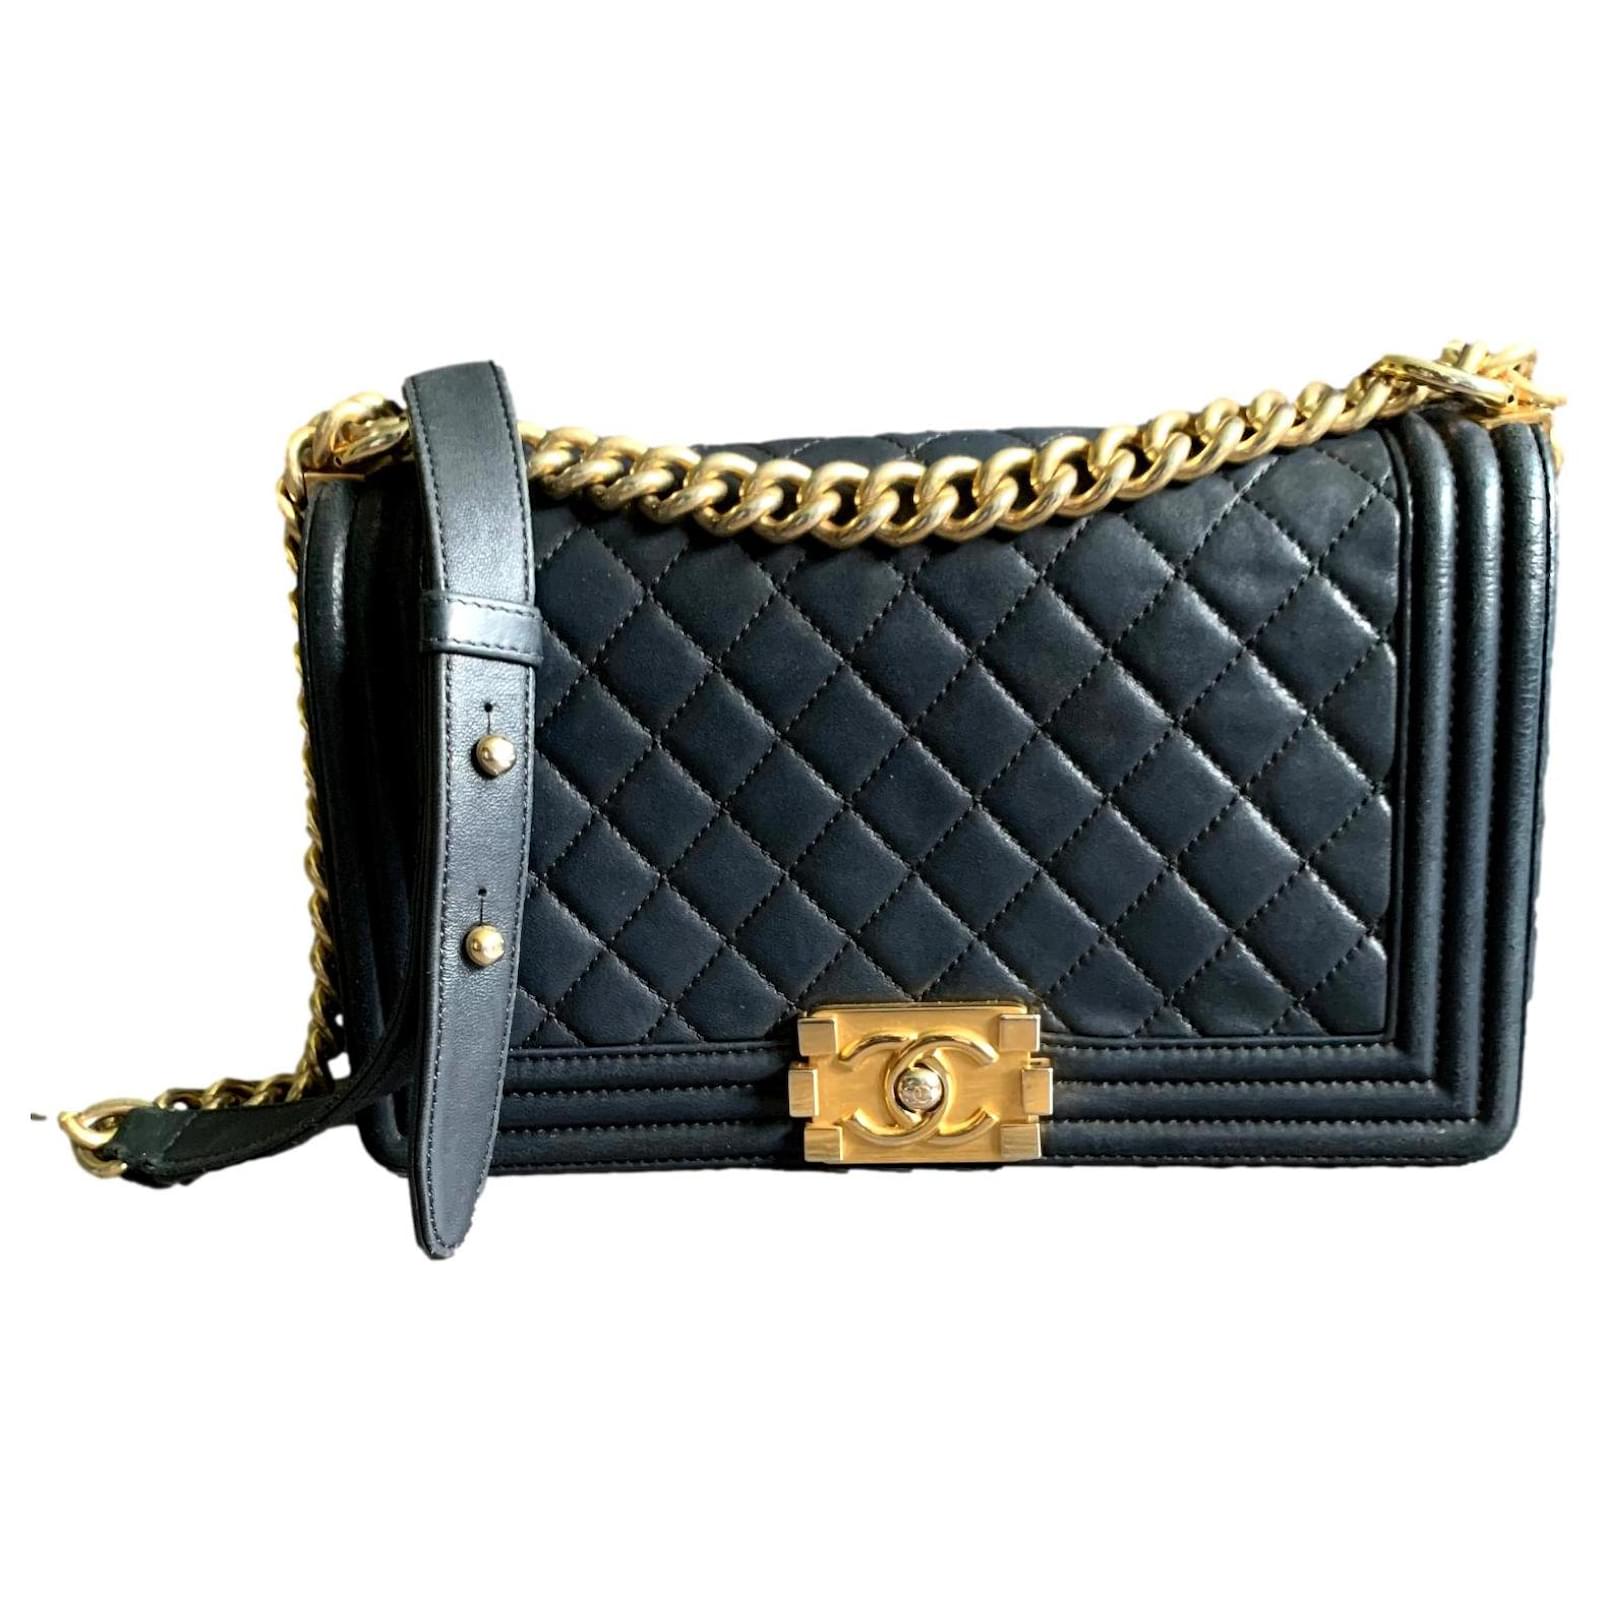 Chanel Chanel Gold Tone Chain x Black Leather Strap for Chanel Bag